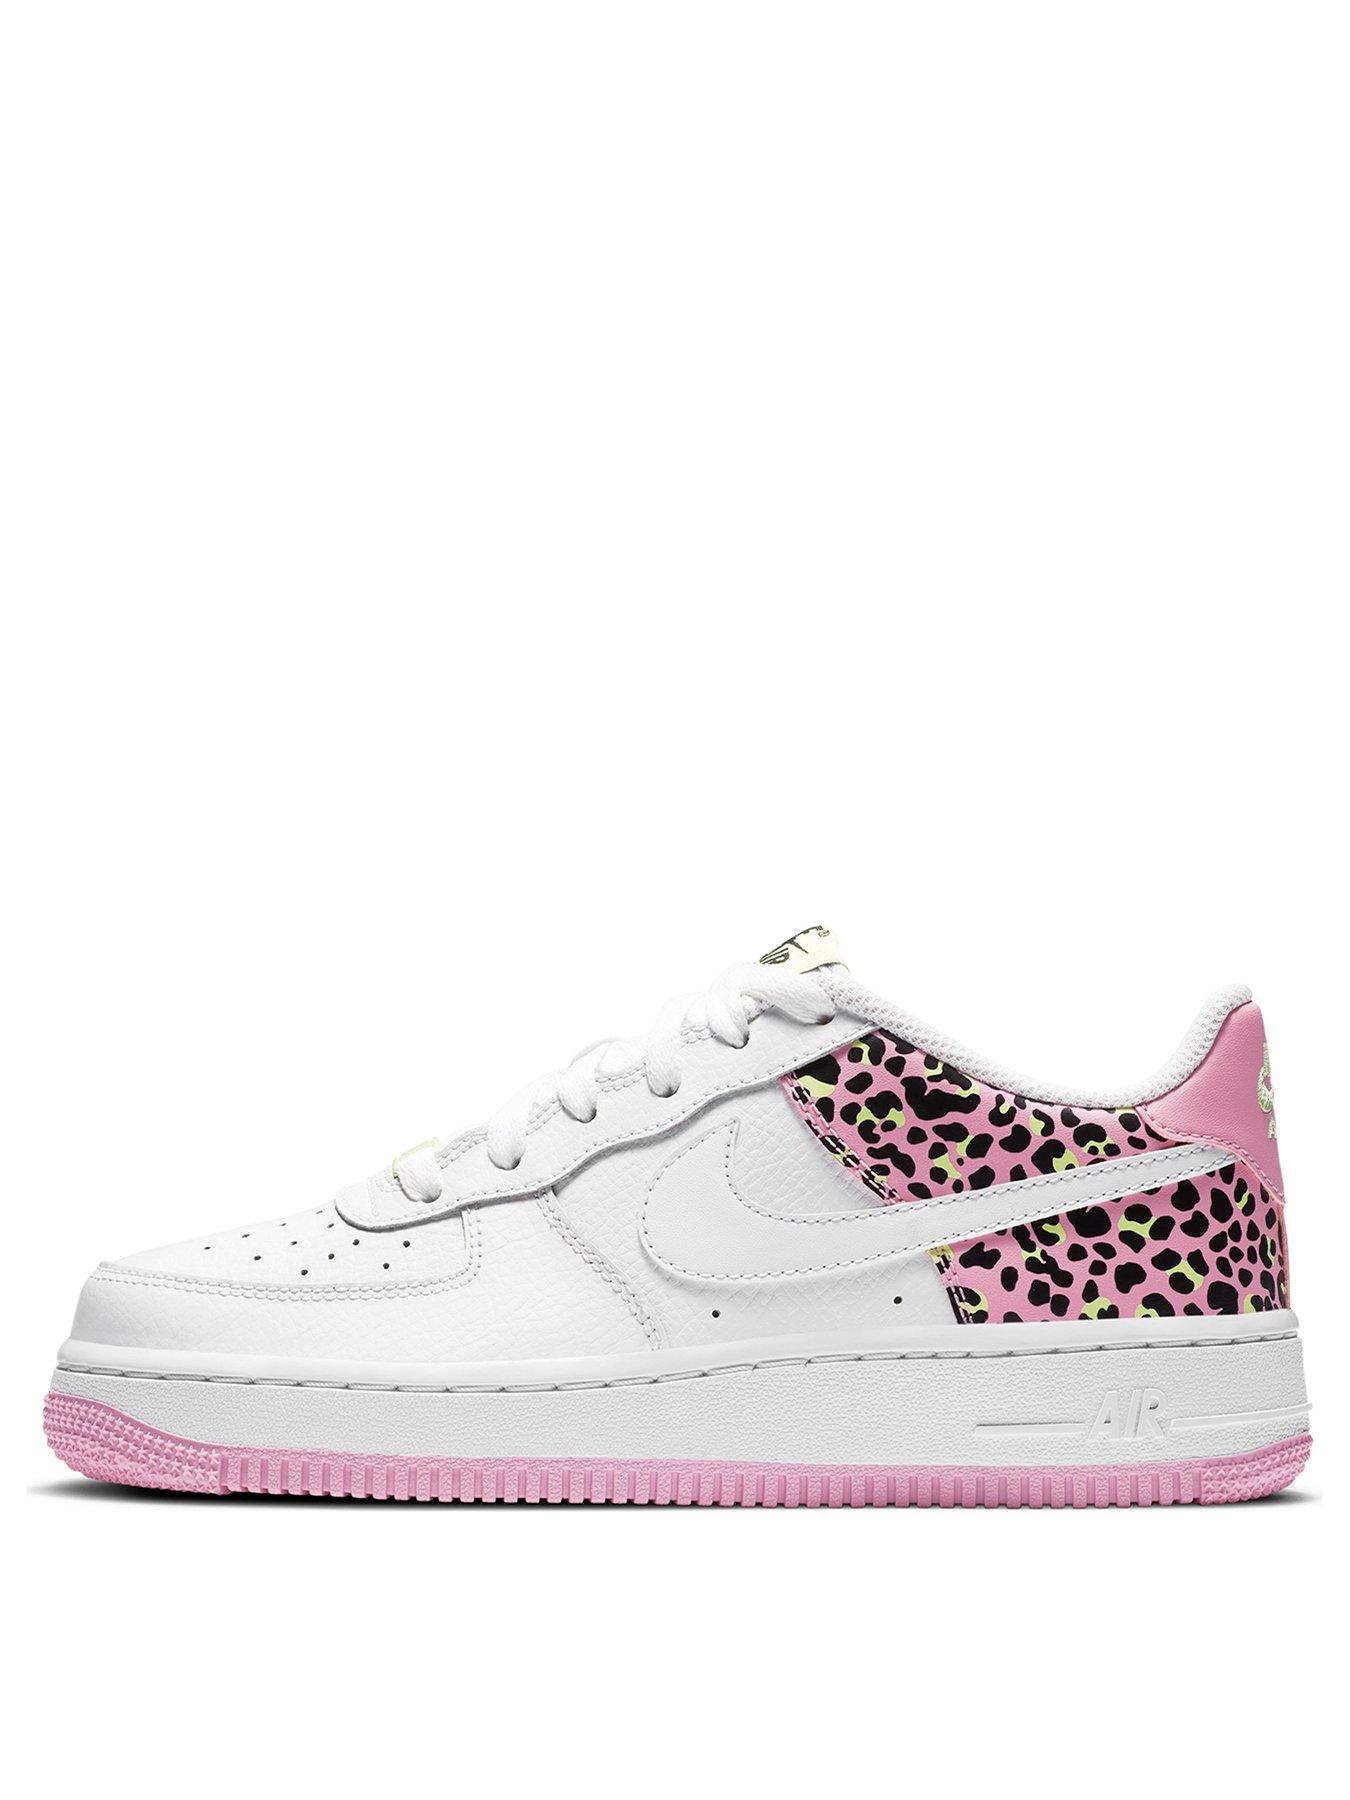 nike air force 1 junior size